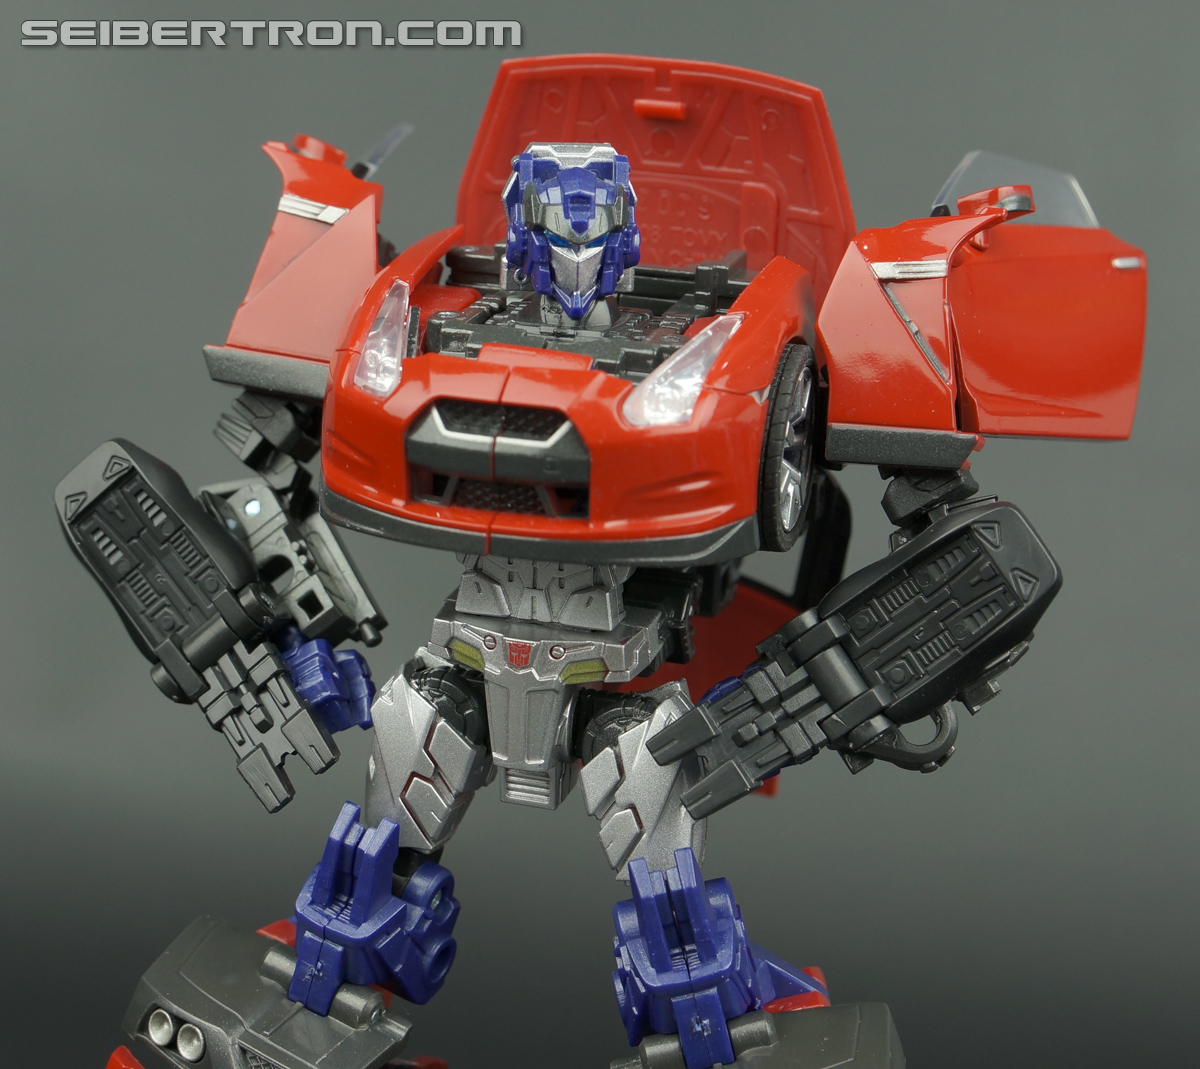 Transformers Alternity Optimus Prime (Vibrant Red) (Convoy (Vibrant Red)) (Image #118 of 166)